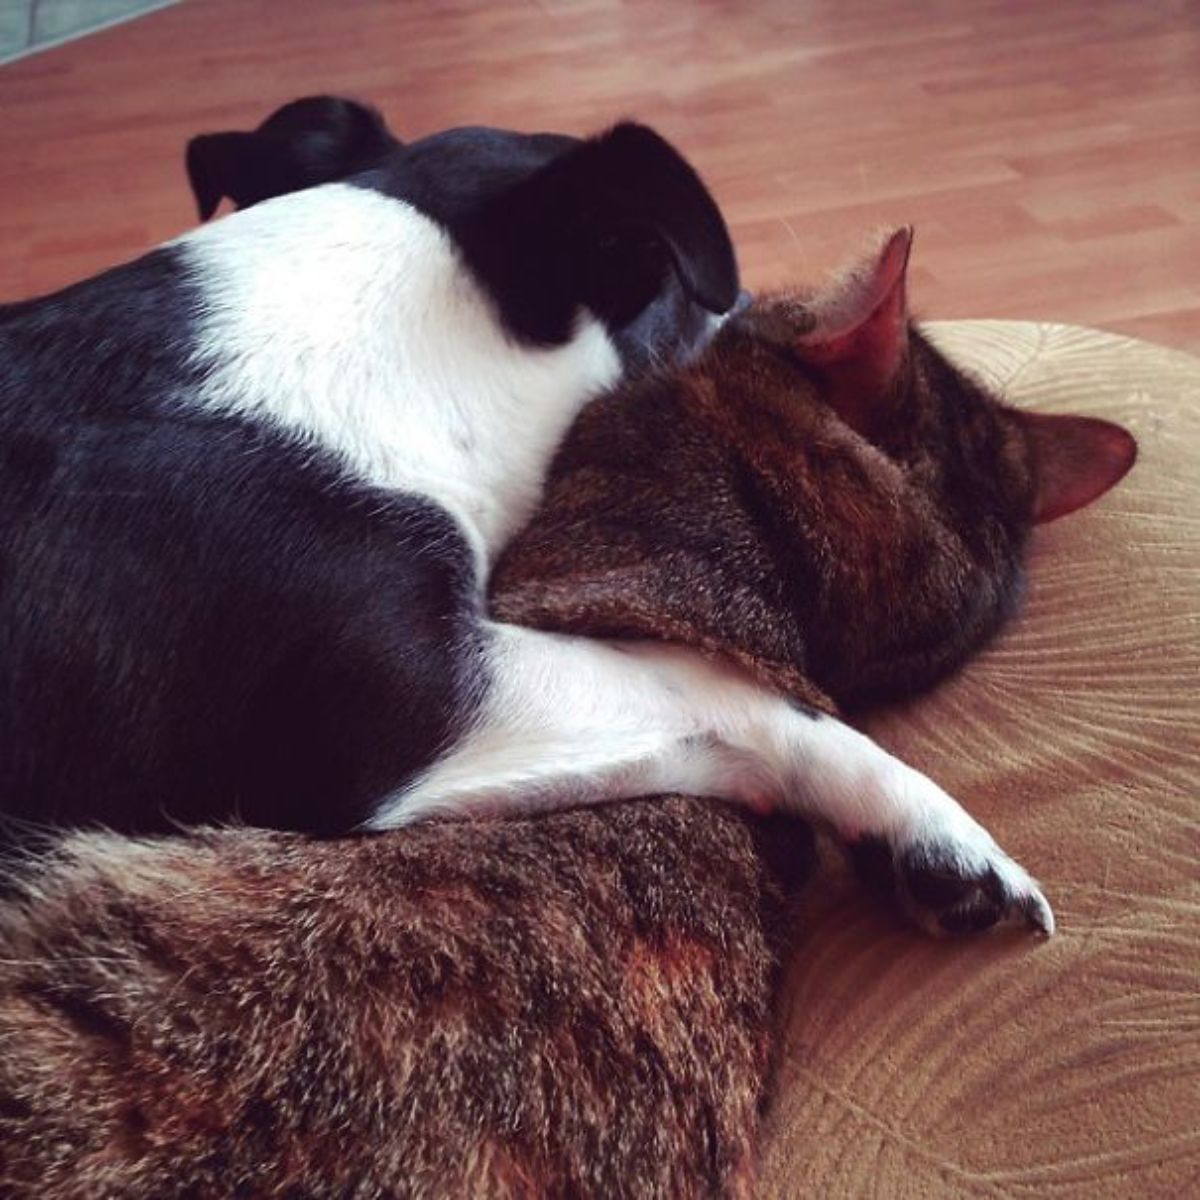 black and white dog cuddling with a brown tabby cat